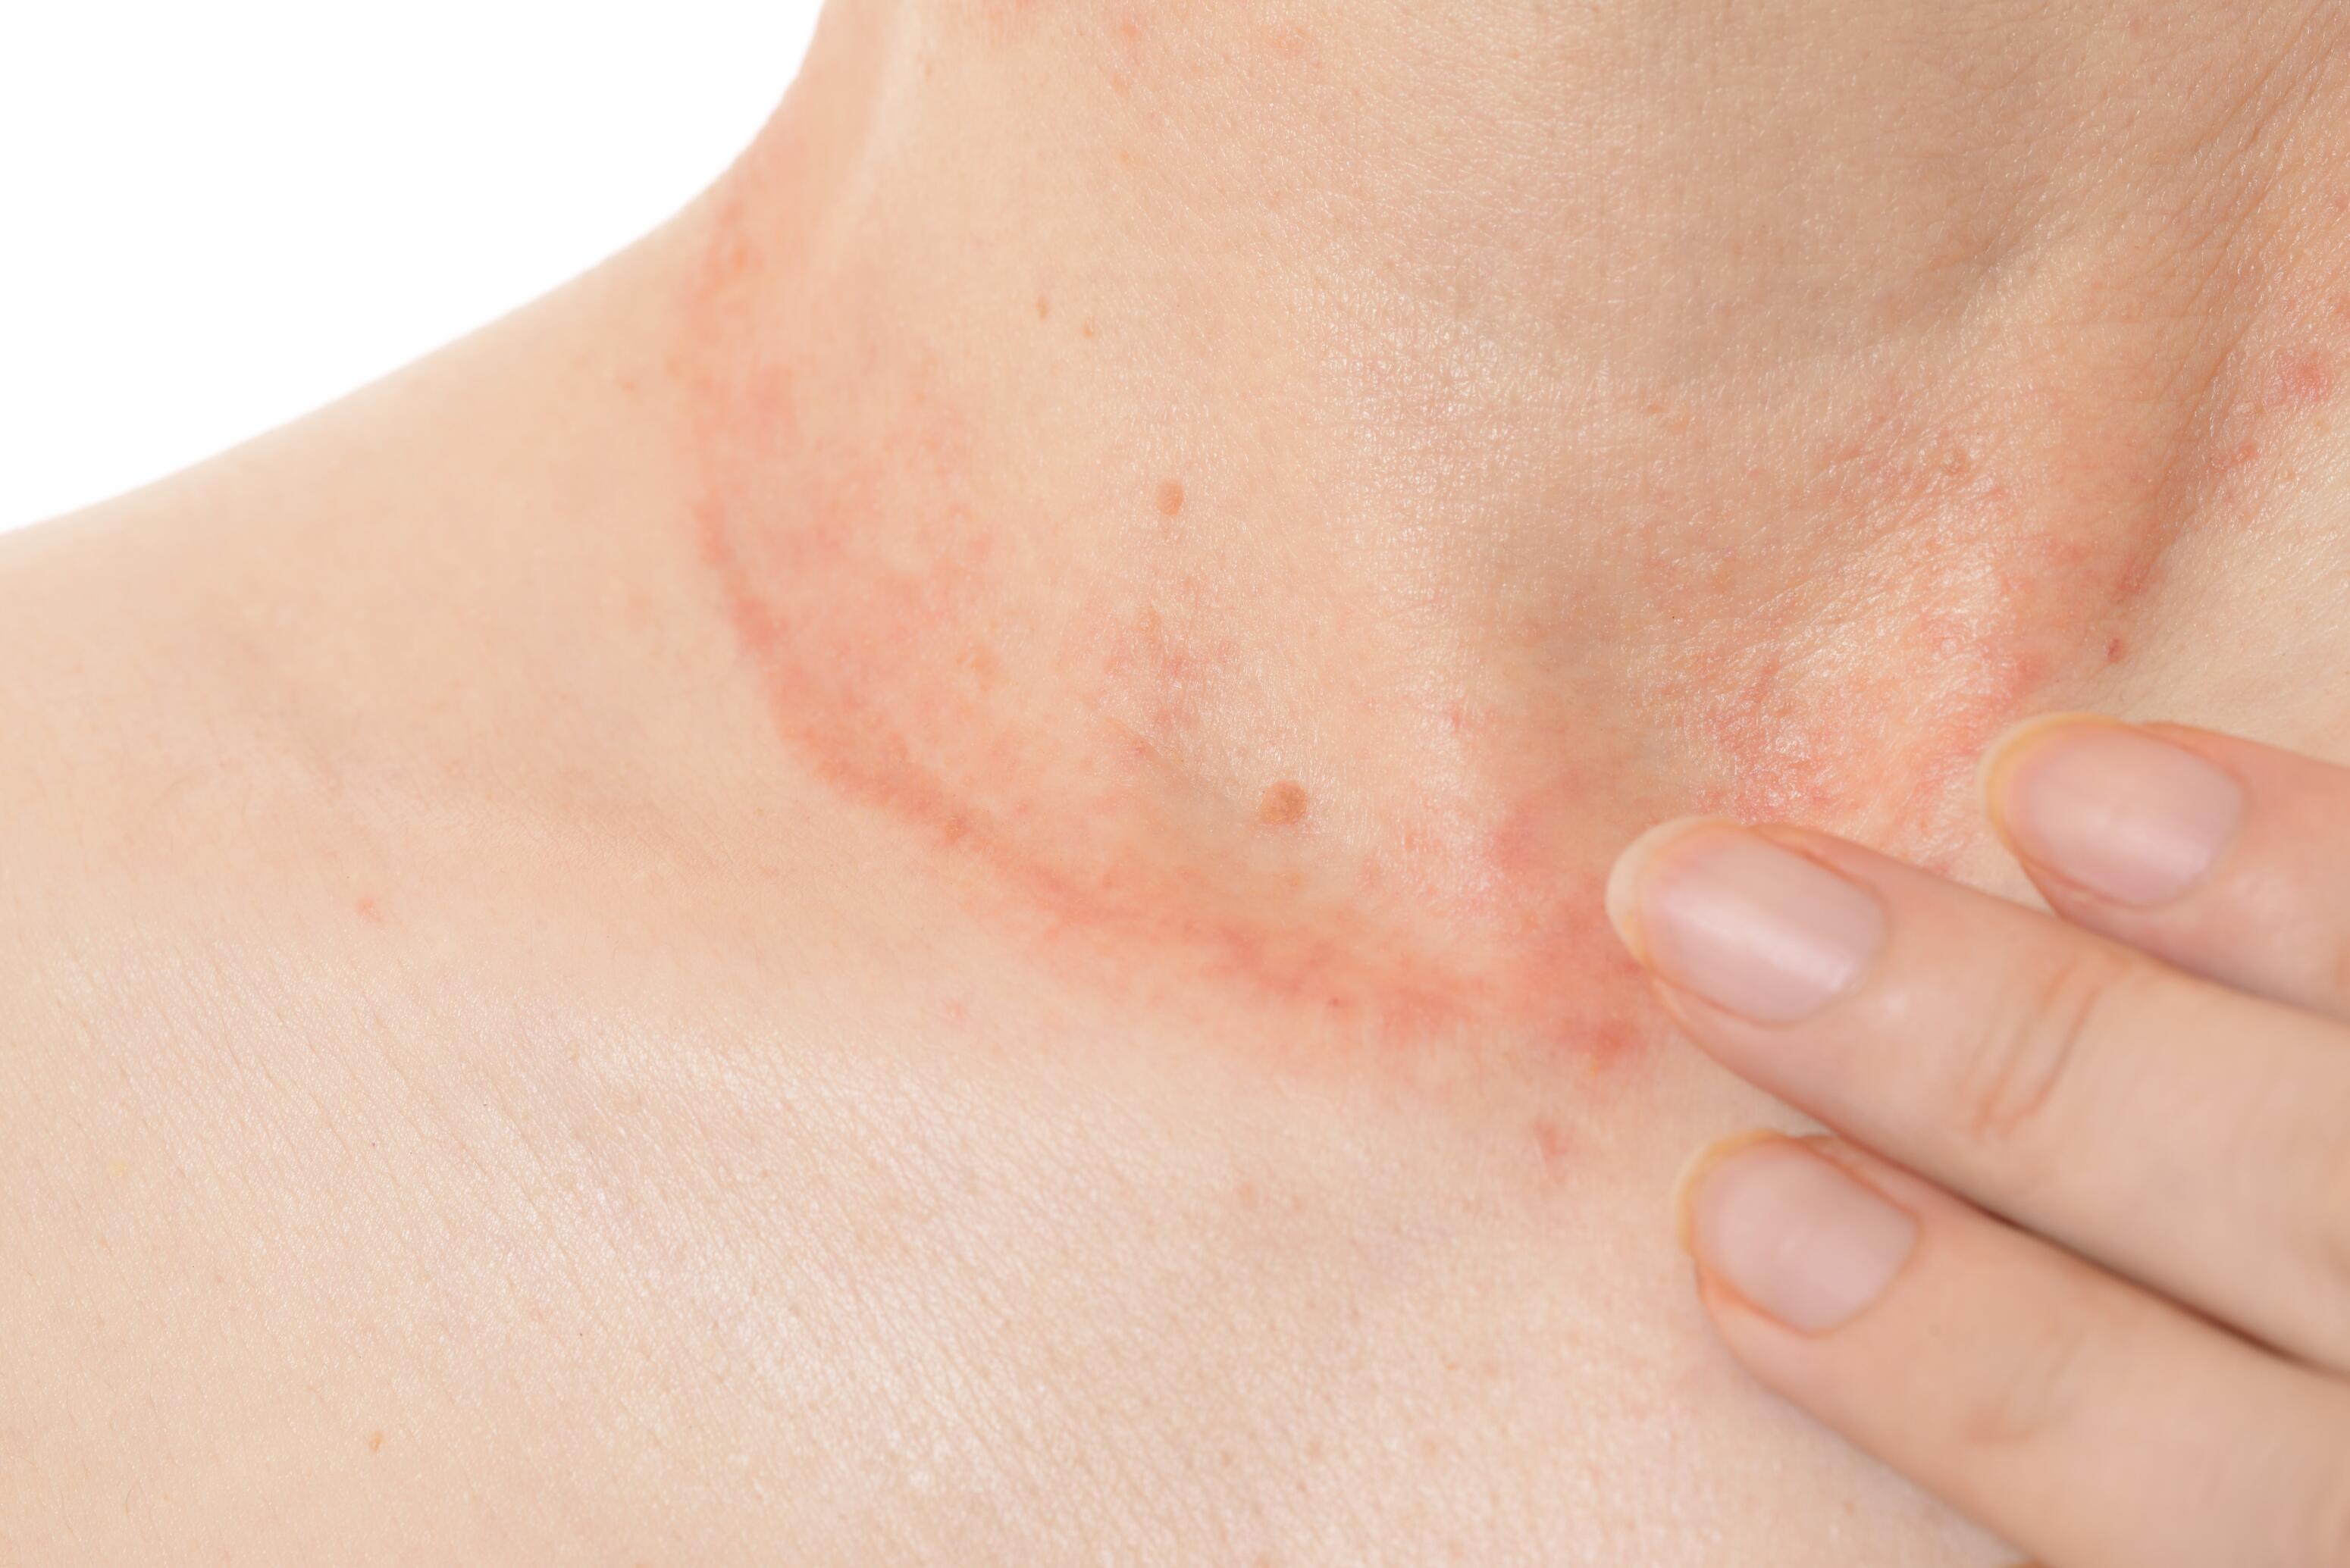 Woman with contact eczema around the neck due to allergy